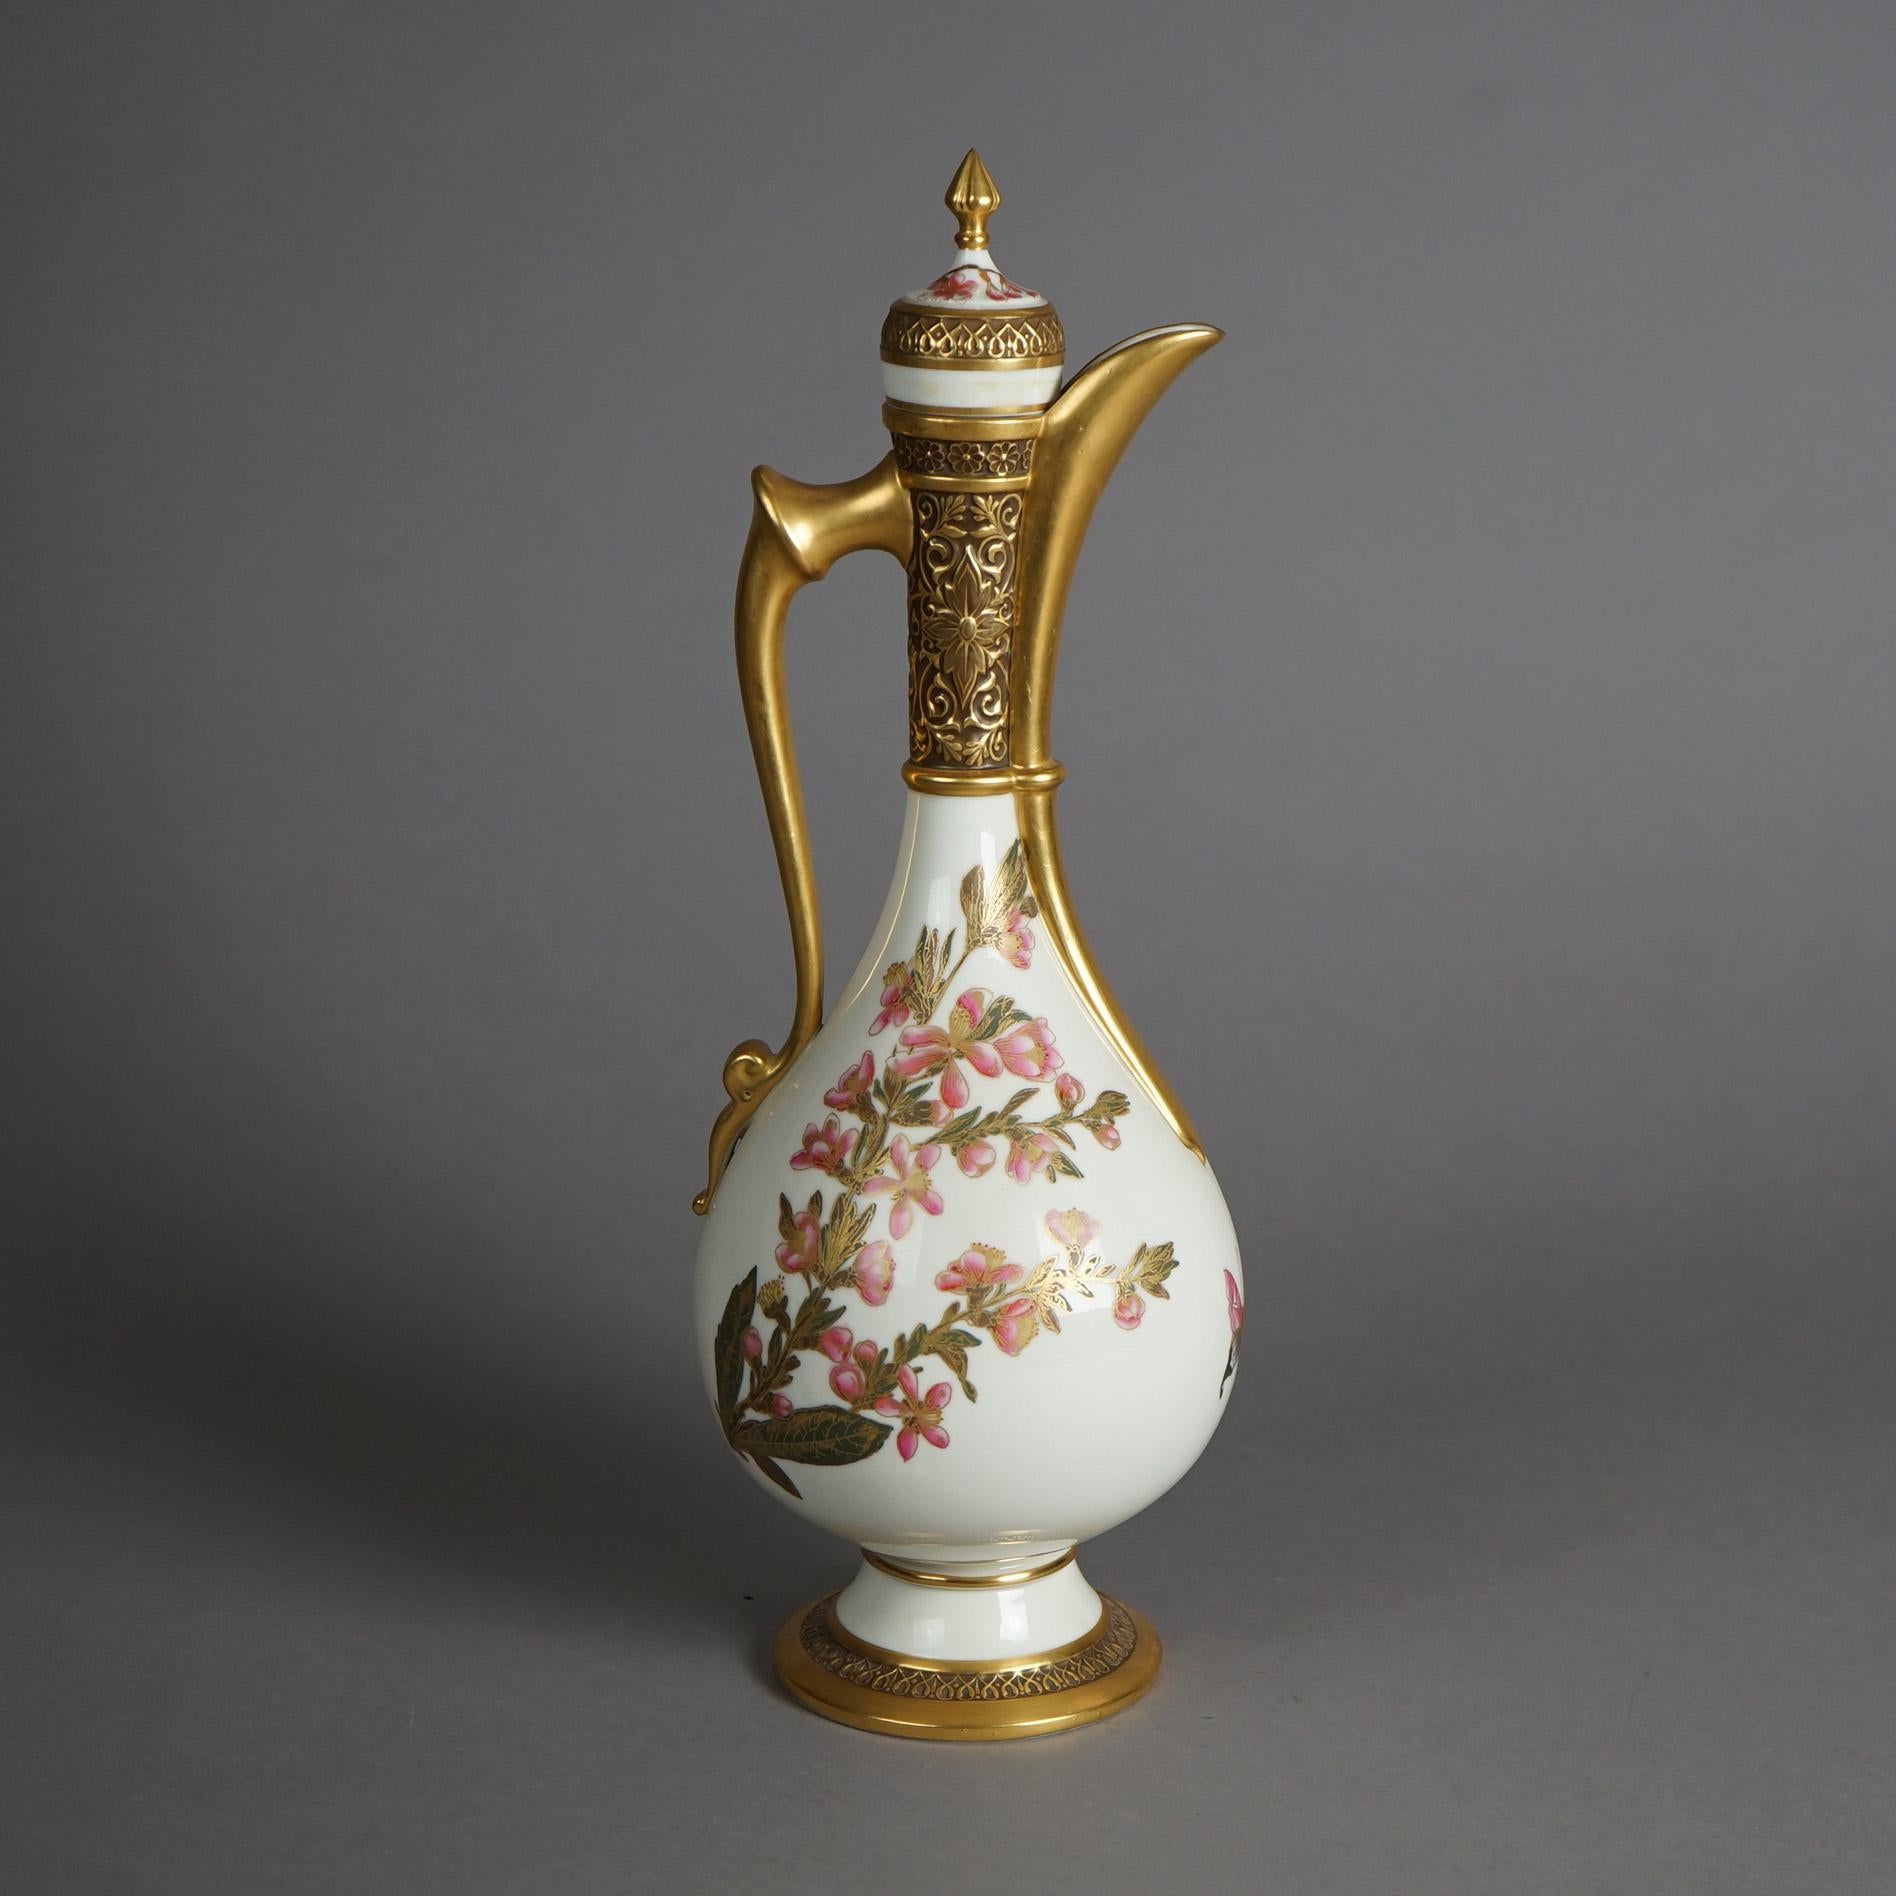 20th Century Antique Royal Worcester Hand Painted, Gilt Egyptian Revival Porcelain Ewer c1900 For Sale